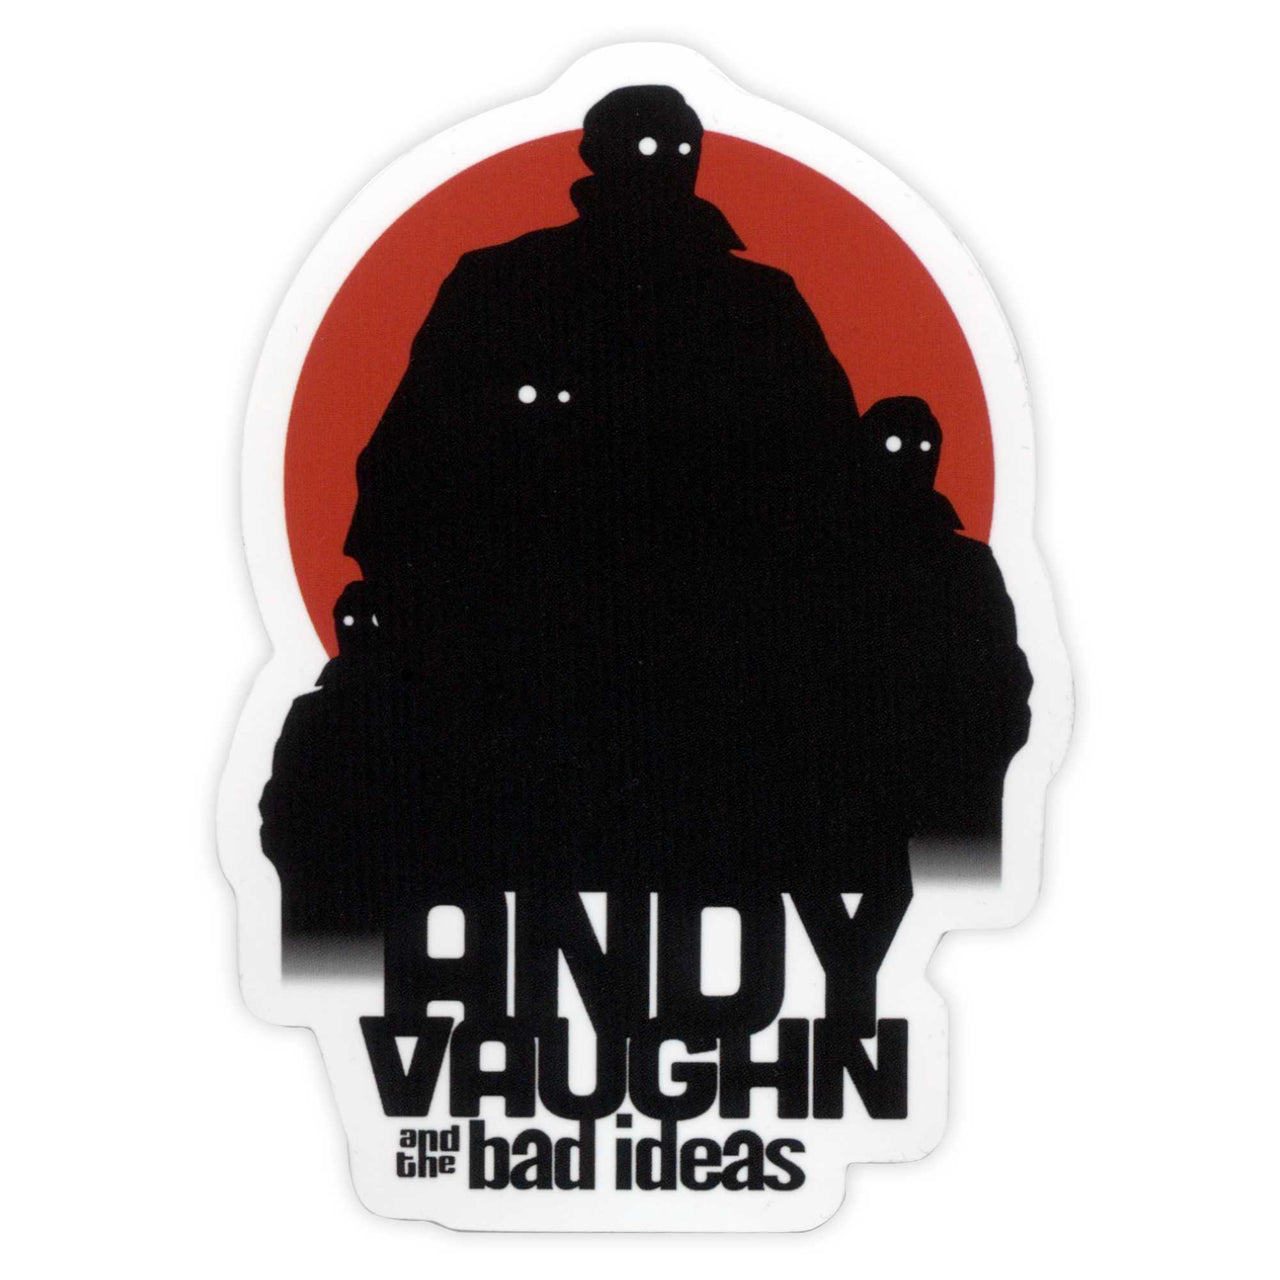 ANDY VAUGHN AND THE BAD IDEAS GROUP STICKER